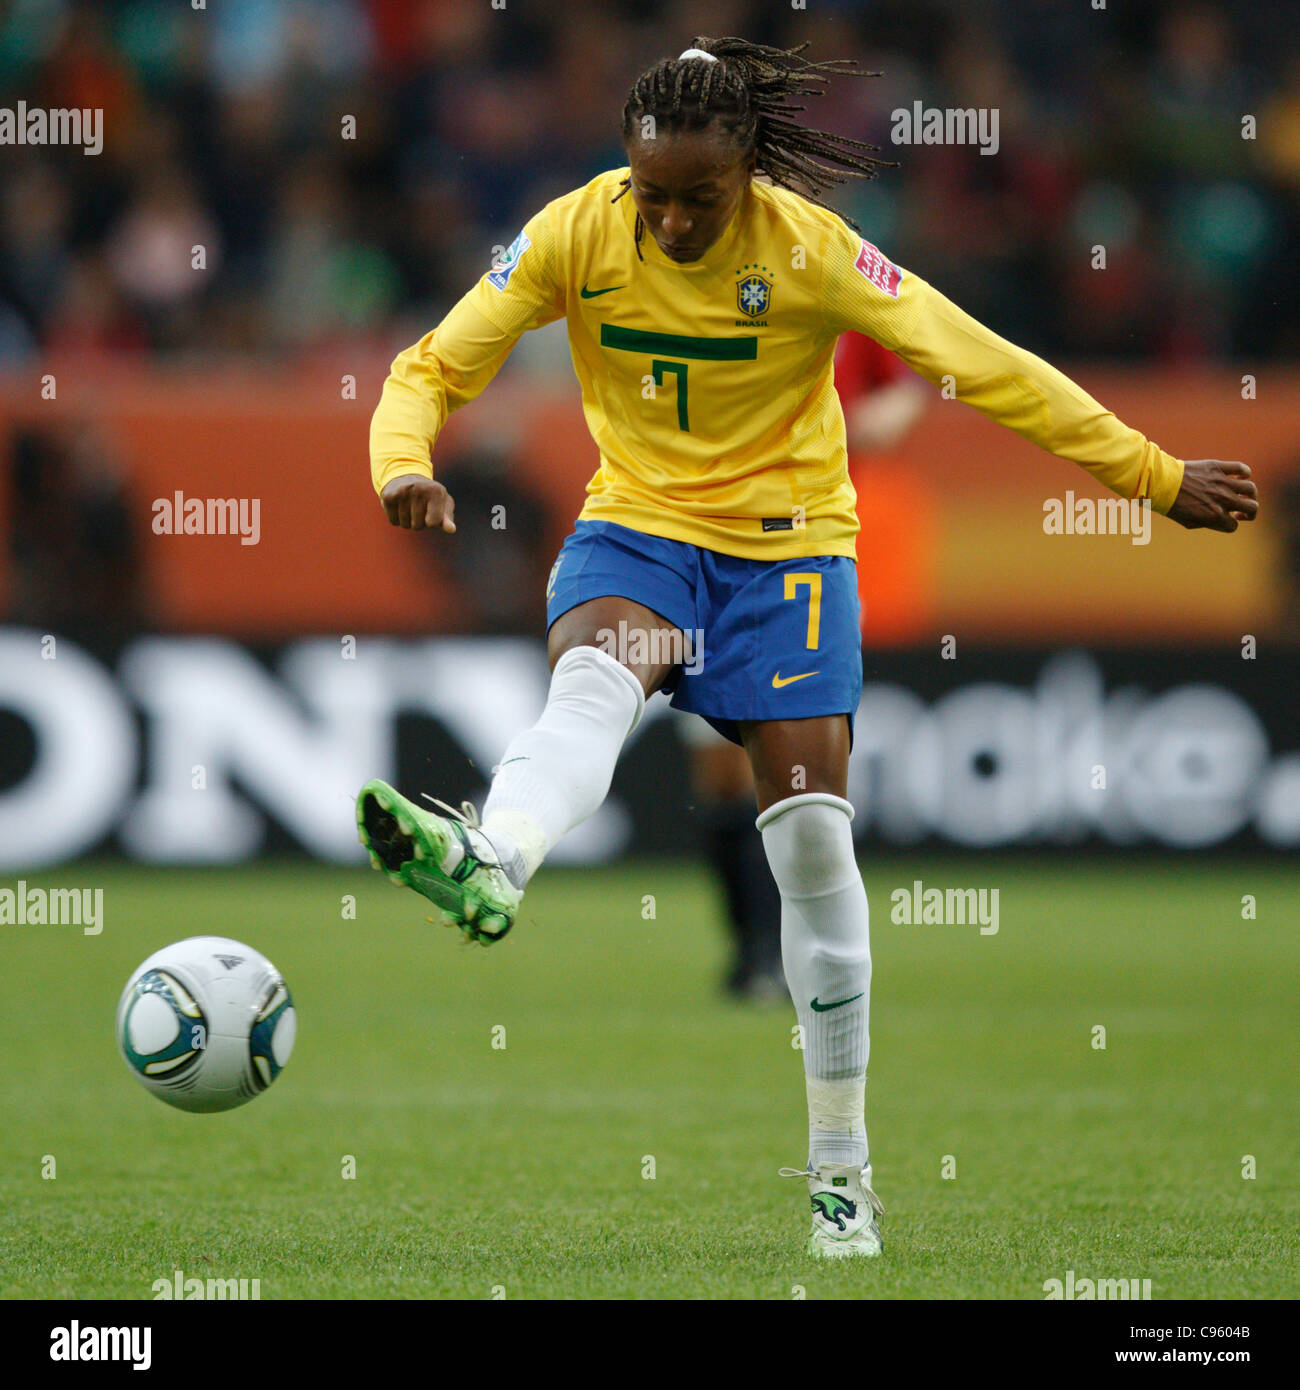 Ester of Brazil kicks the ball during a 2011 FIFA Women's World Cup Group D match against Norway. Stock Photo